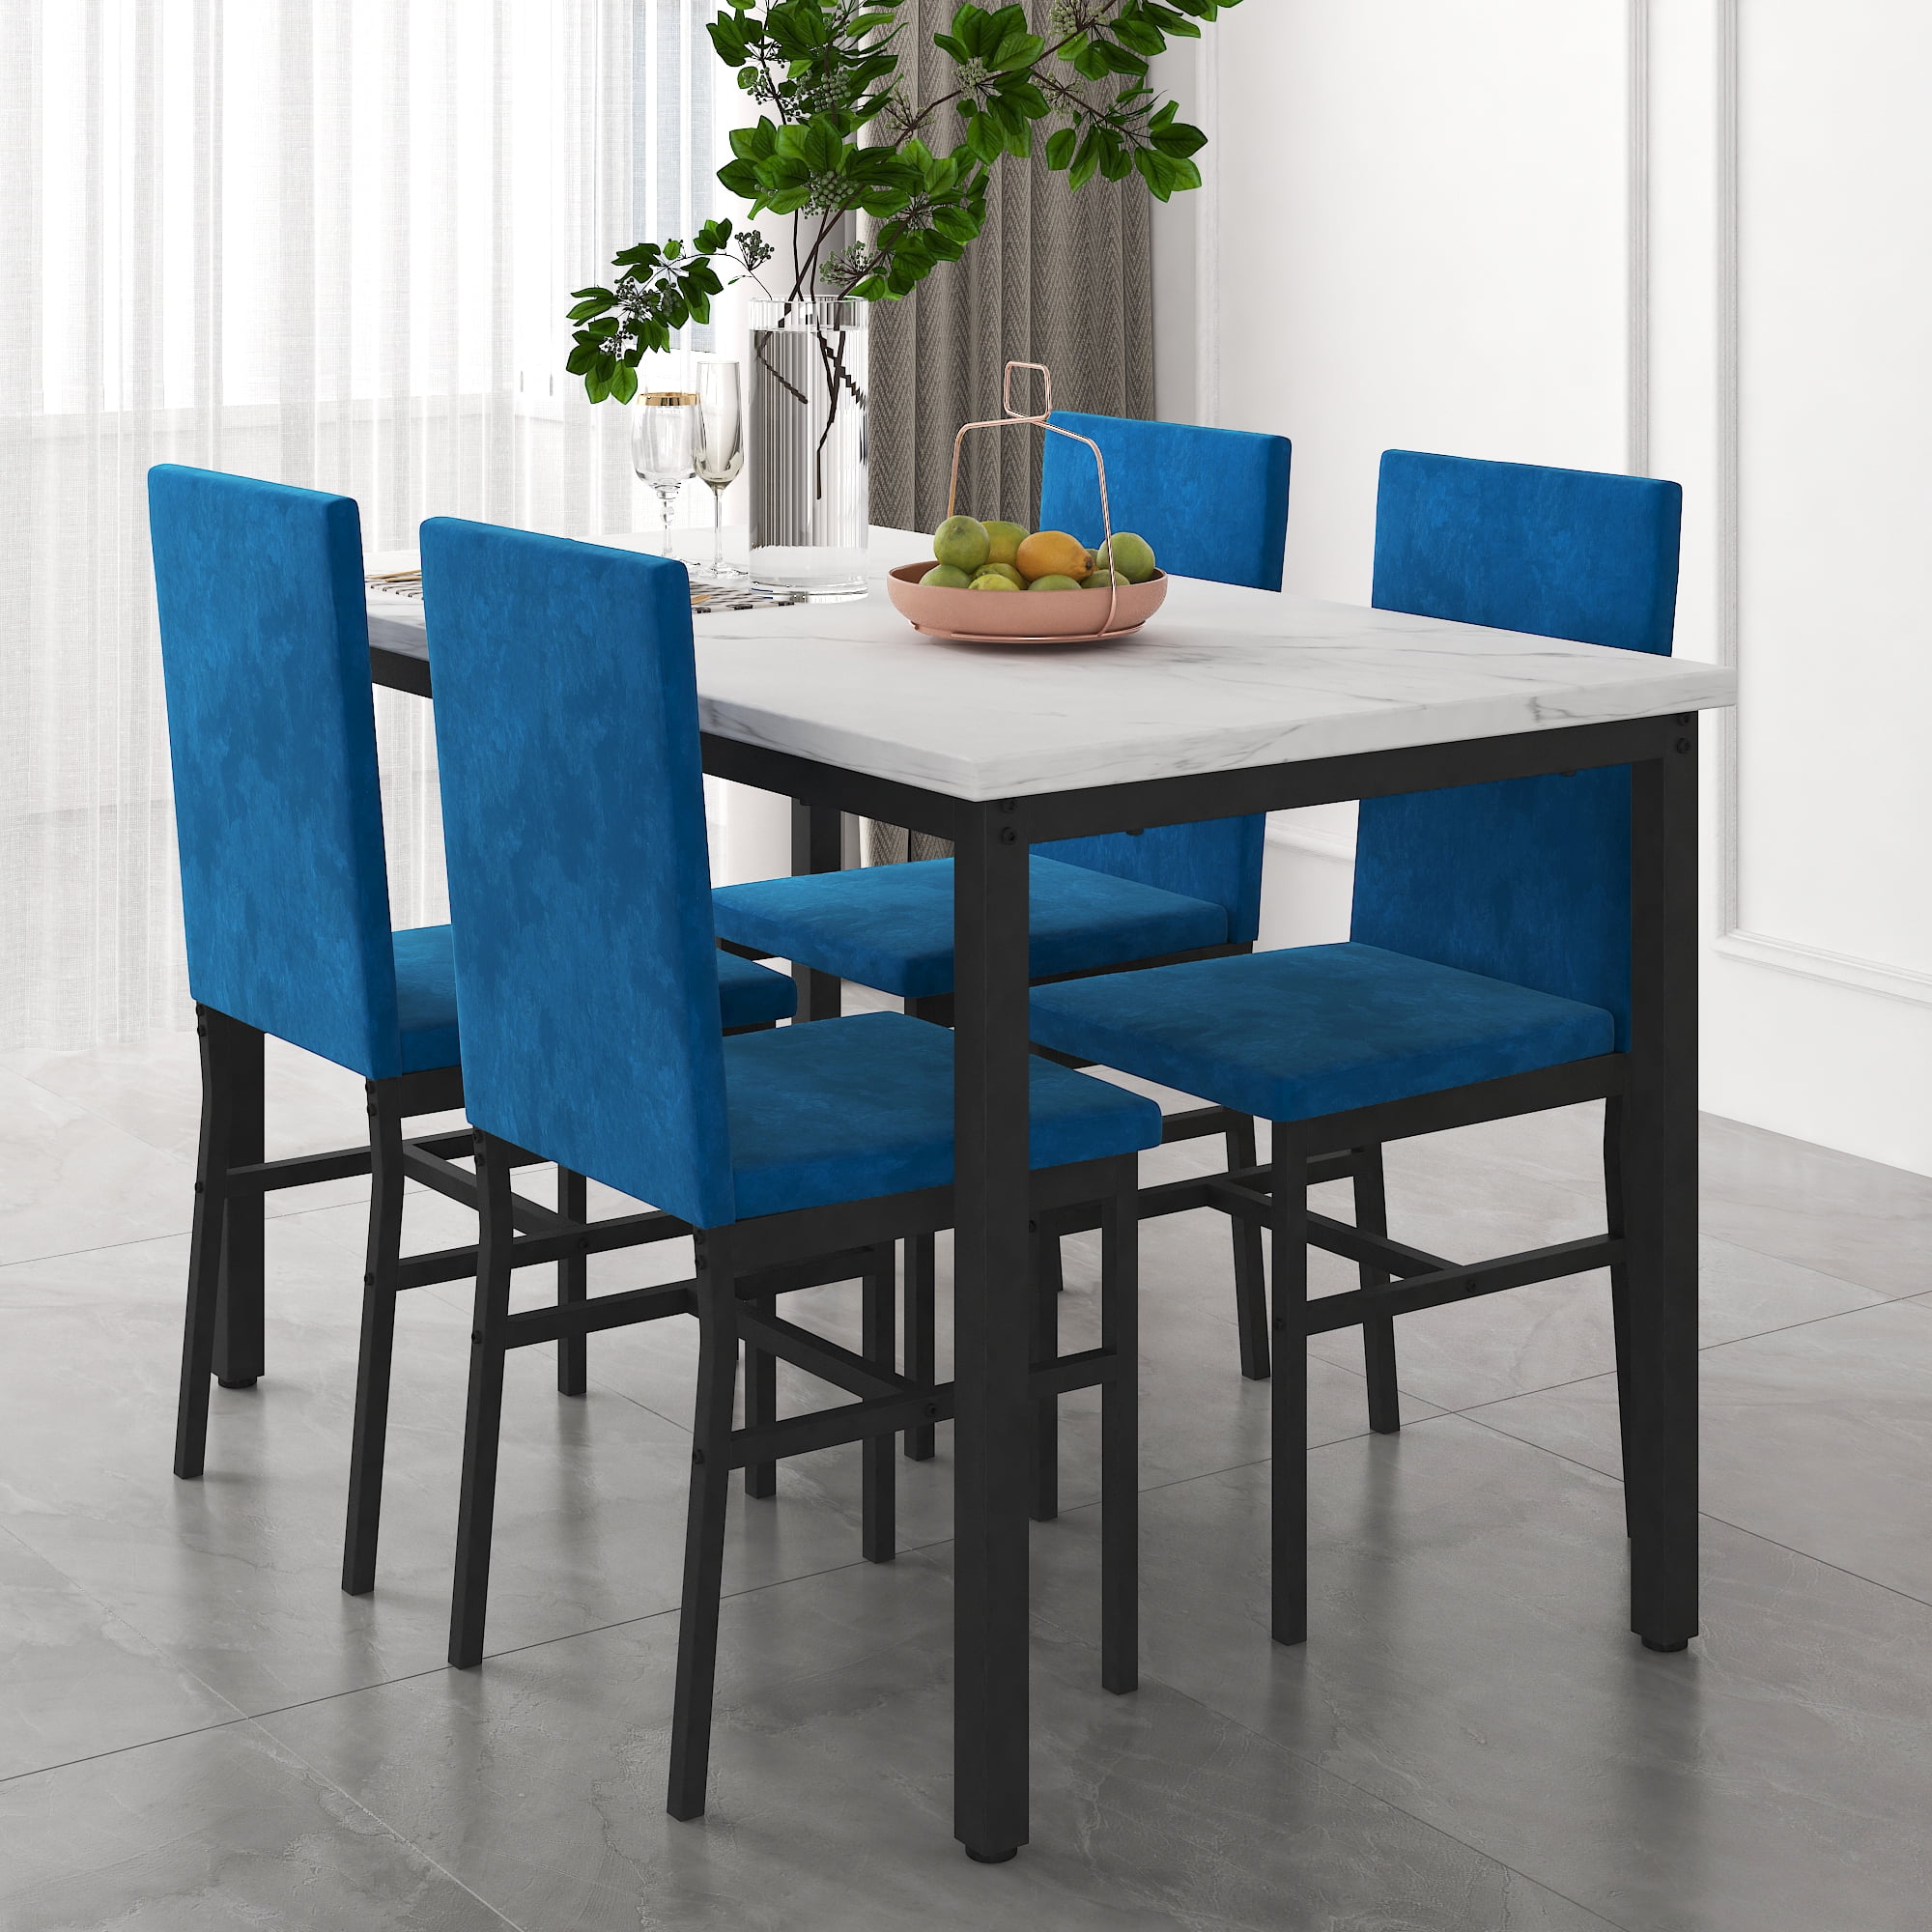 5 Piece Kitchen Dining Table and Chair Set, Dining Room Table Set with Faux Marble Table Velvet Padded Chairs, Rectangle Dining Table Set for 4, Dinette Set for Kitchen Dining Room Small Space